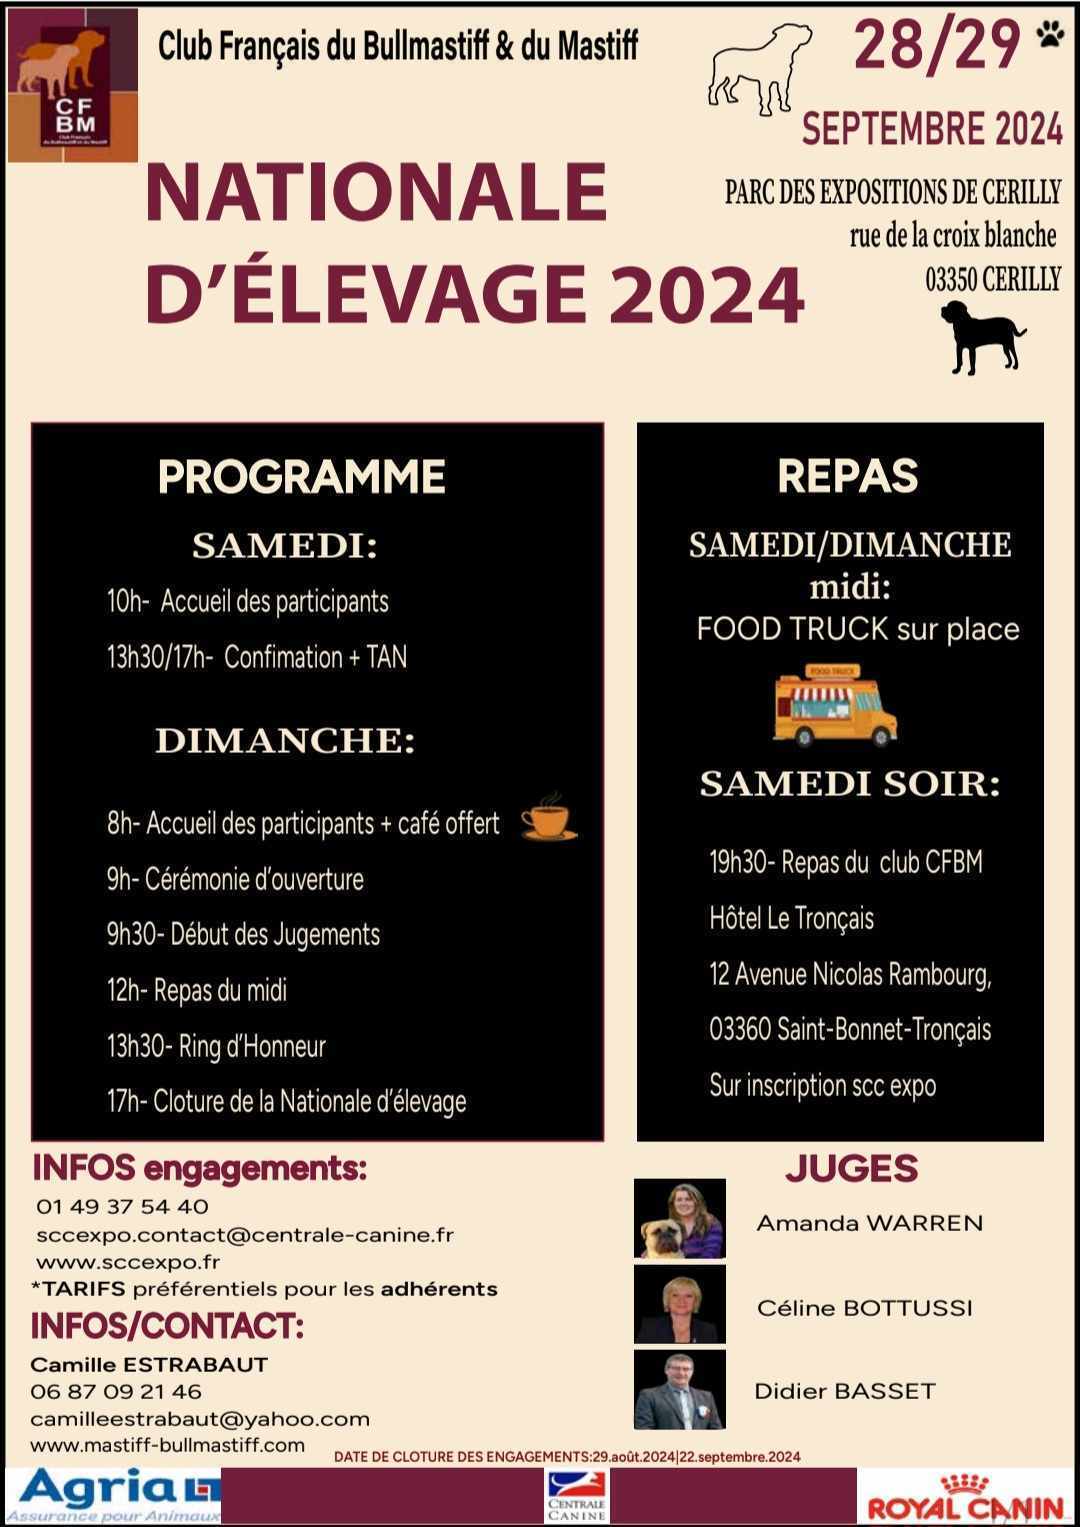 NATIONALE D'ELEVAGE 2024